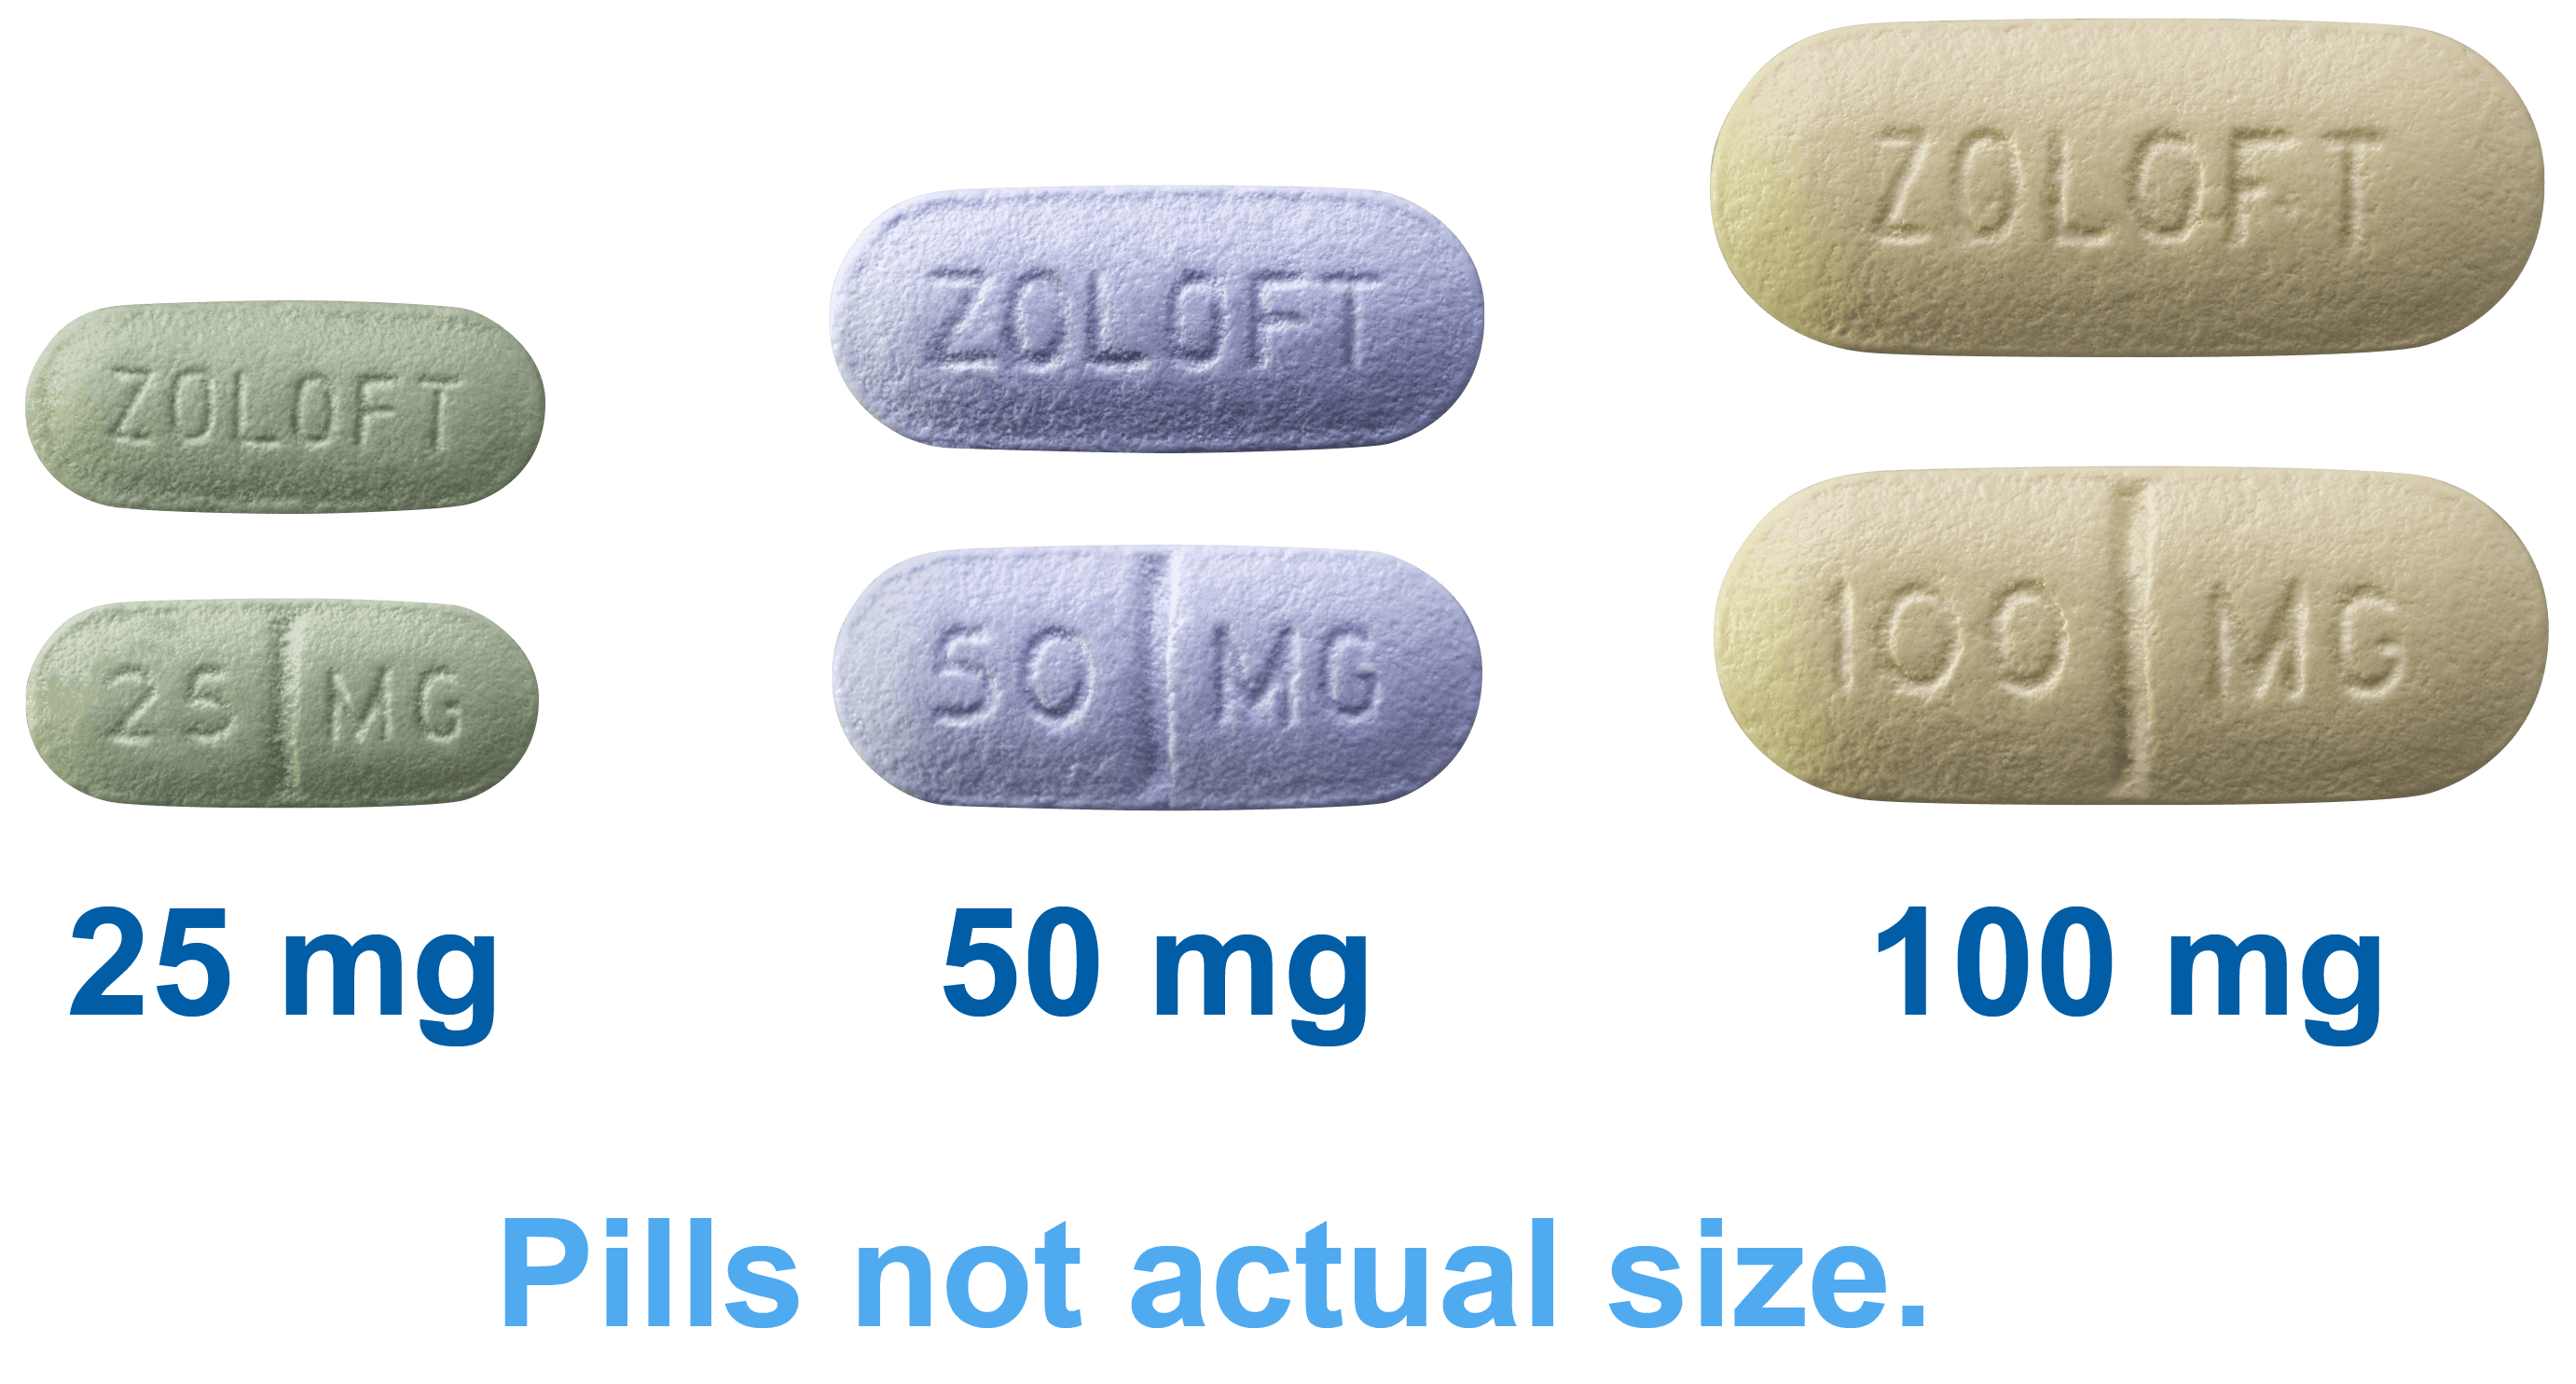 front and back image of each dose size of Zoloft (sertraline HCl)